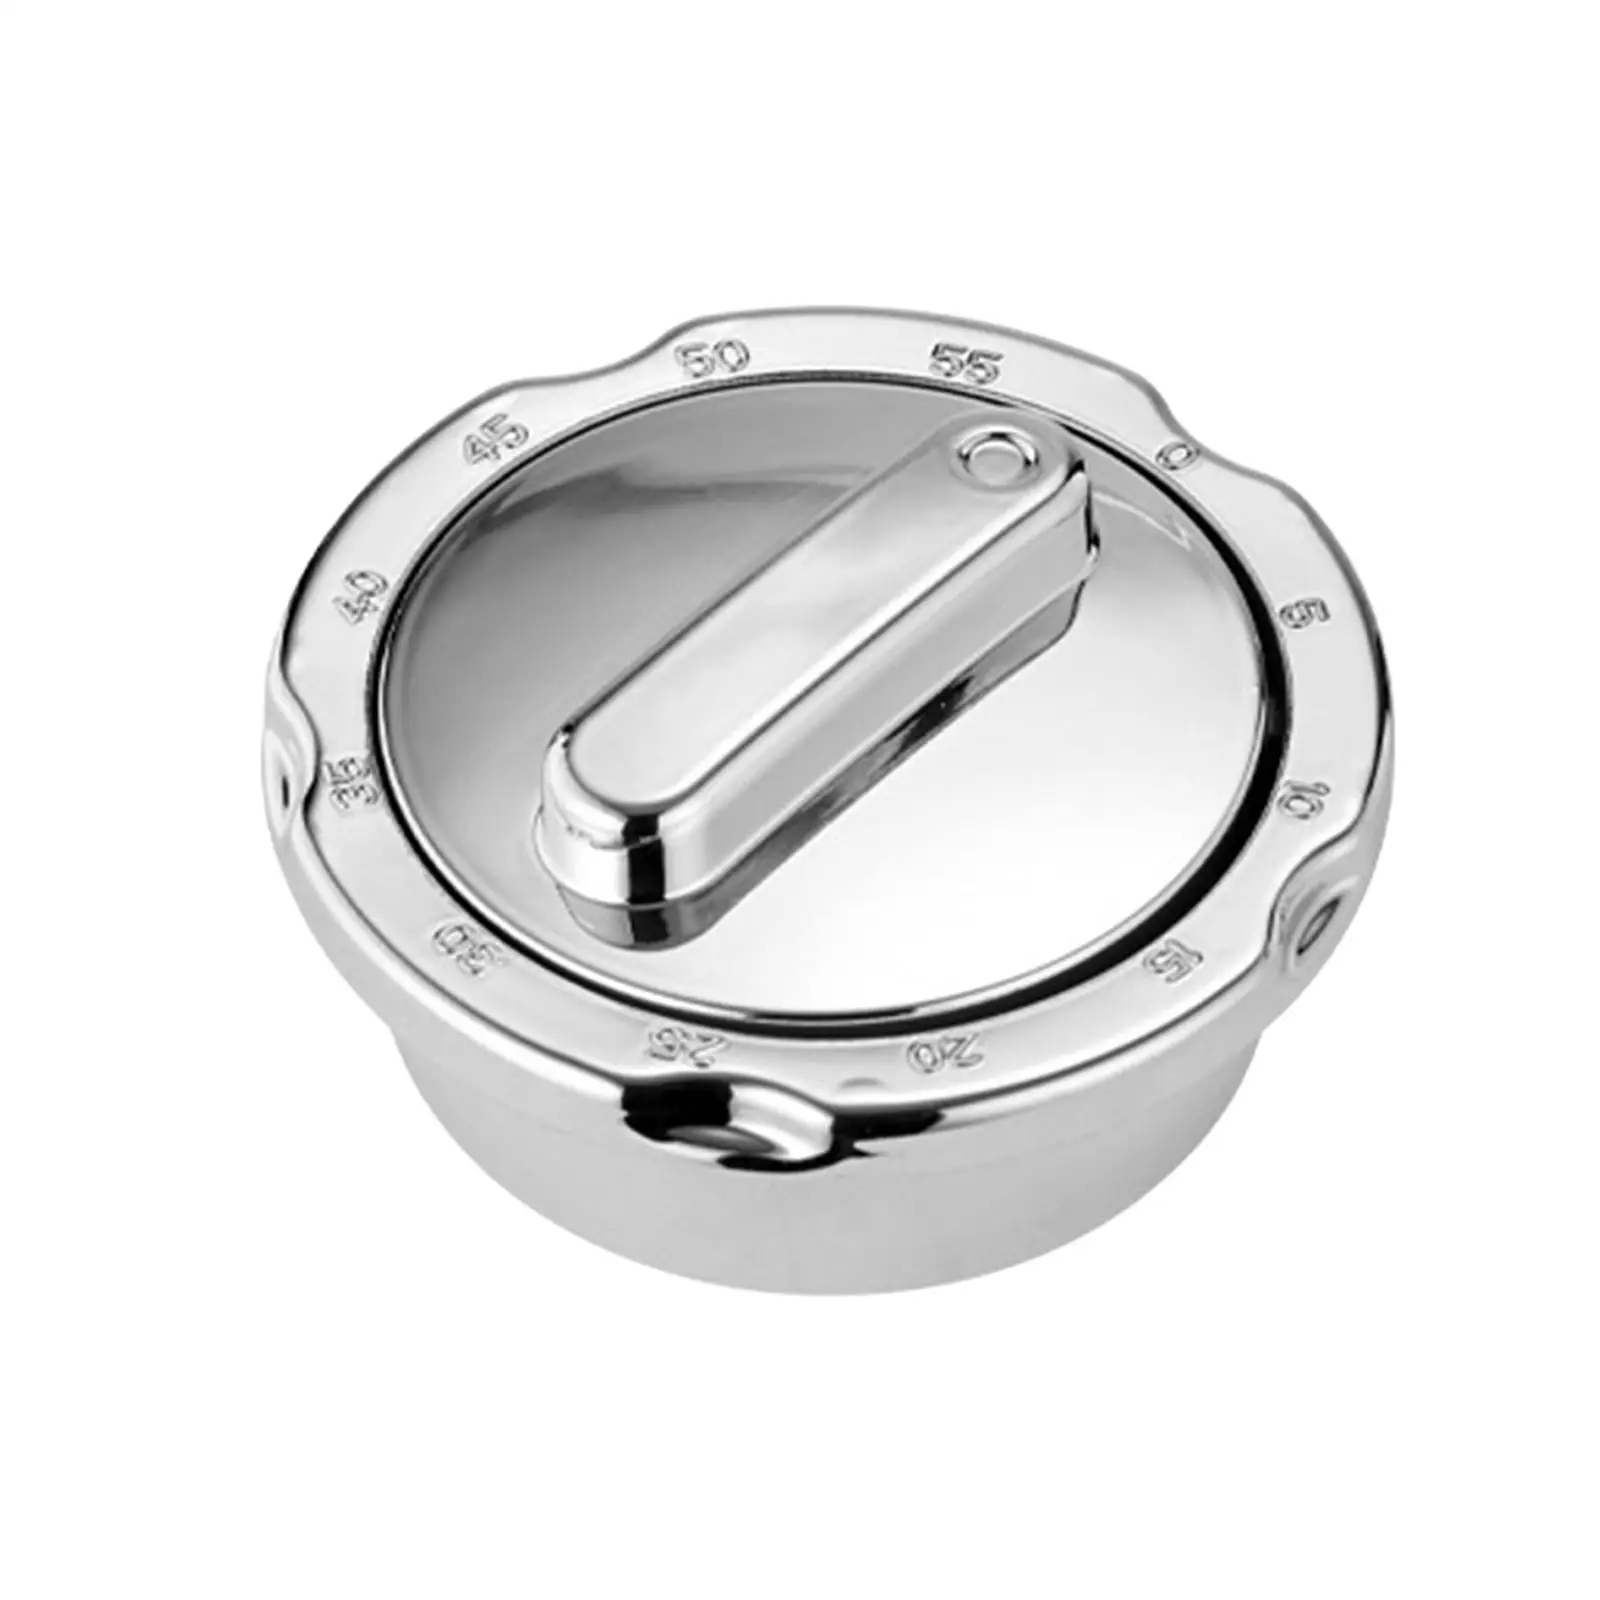 Kitchen Pot Lid Timer Loud Alarm Time Management Cooking Utensils Accessories Easy to Install Stainless Steel Cooking Timer